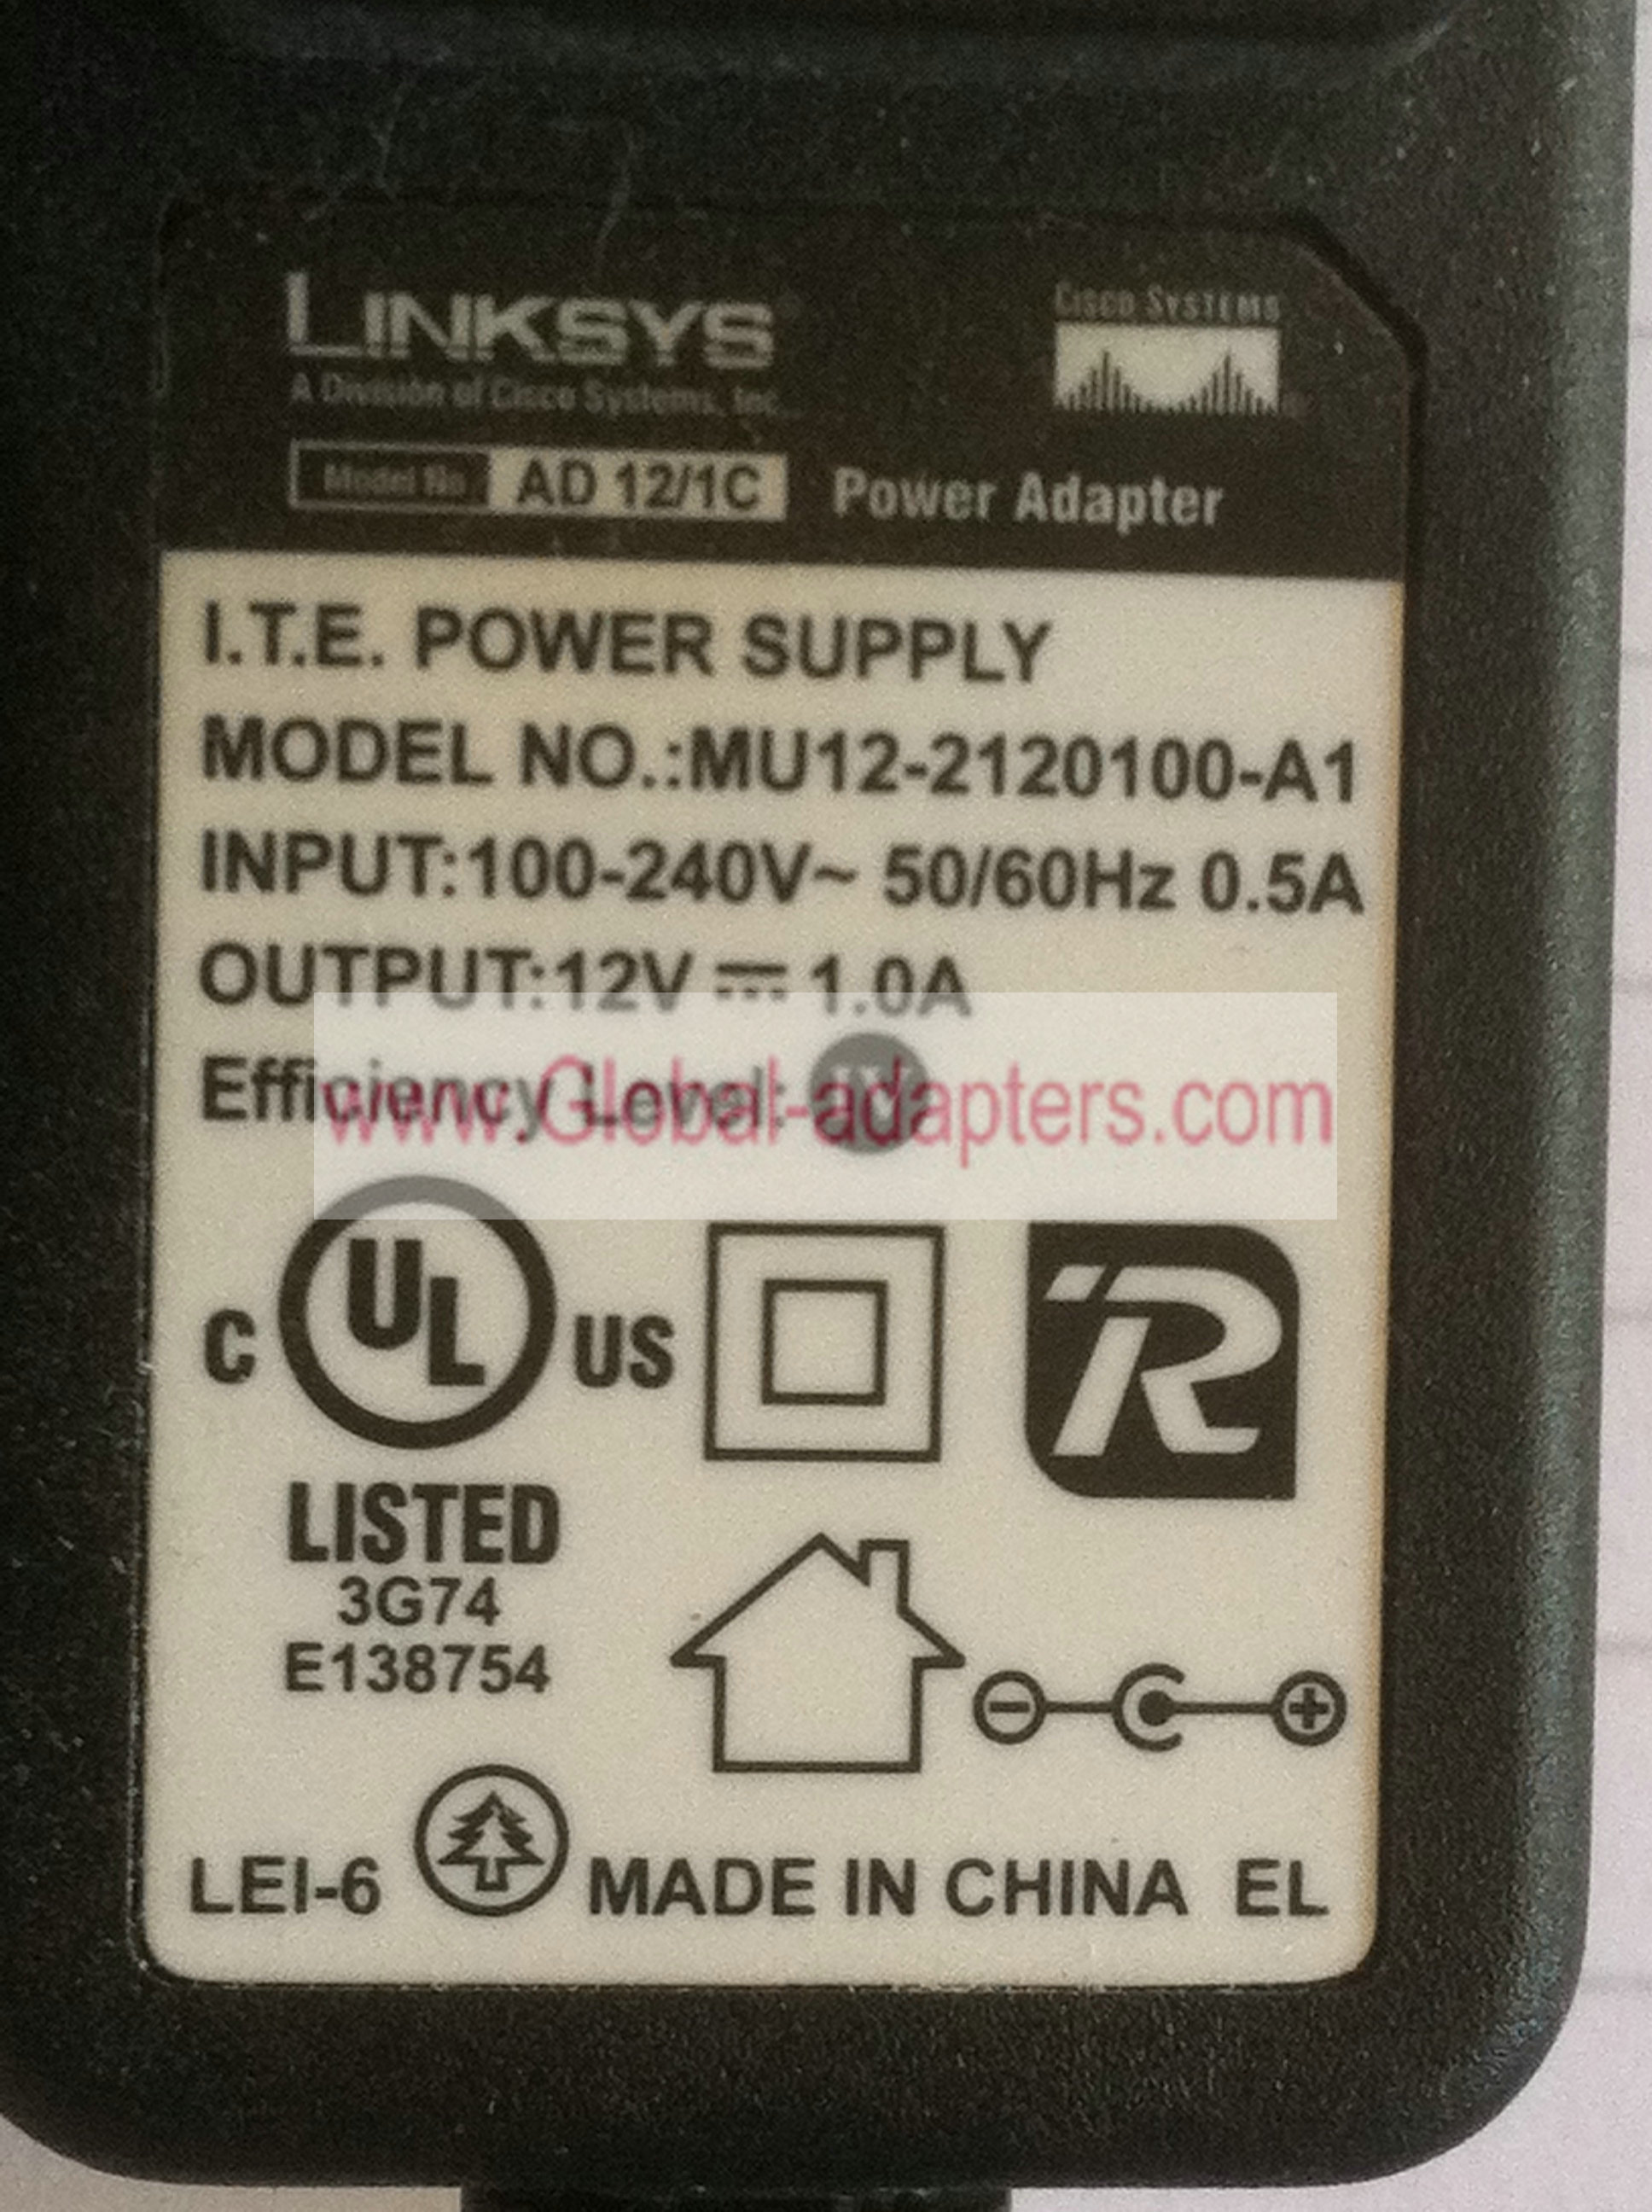 NEW Linksys MU12-2120100-A1 12v 1a AC ADAPTER FOR WRVS4400N 2103-30011204R Power Adapter